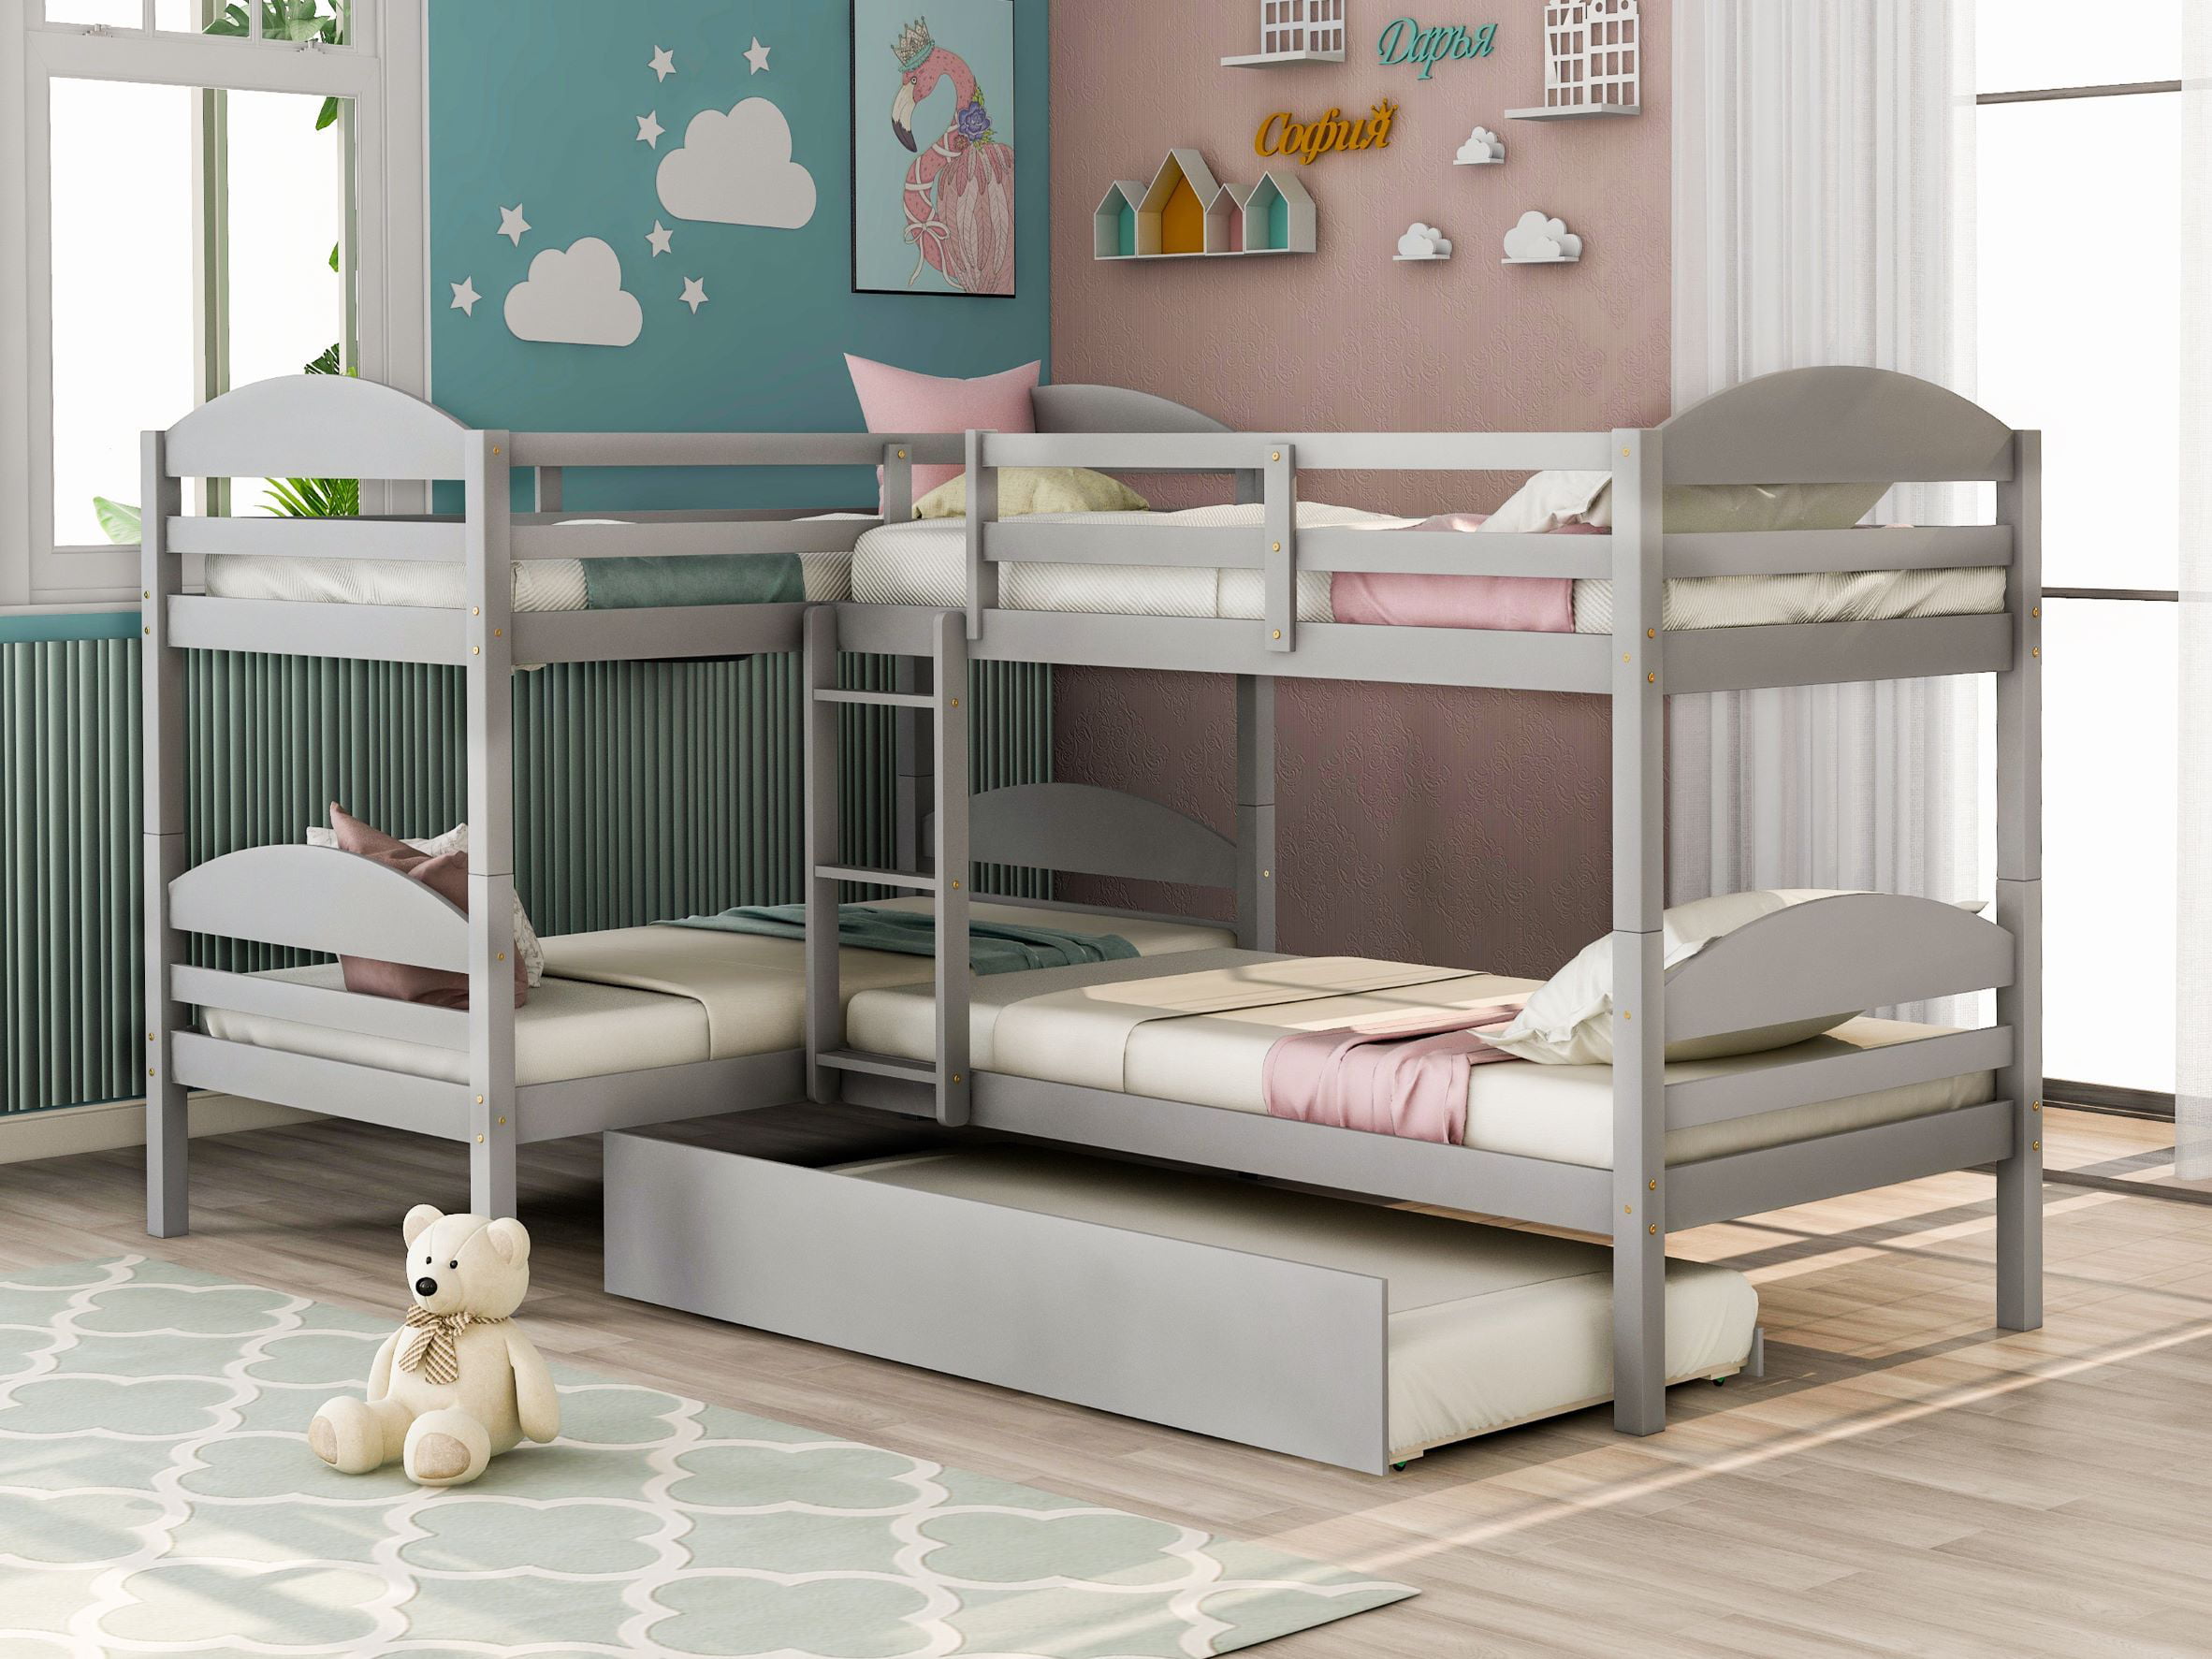 Trundle Twin Over Bunk Beds, Birch Lane Bunk Beds